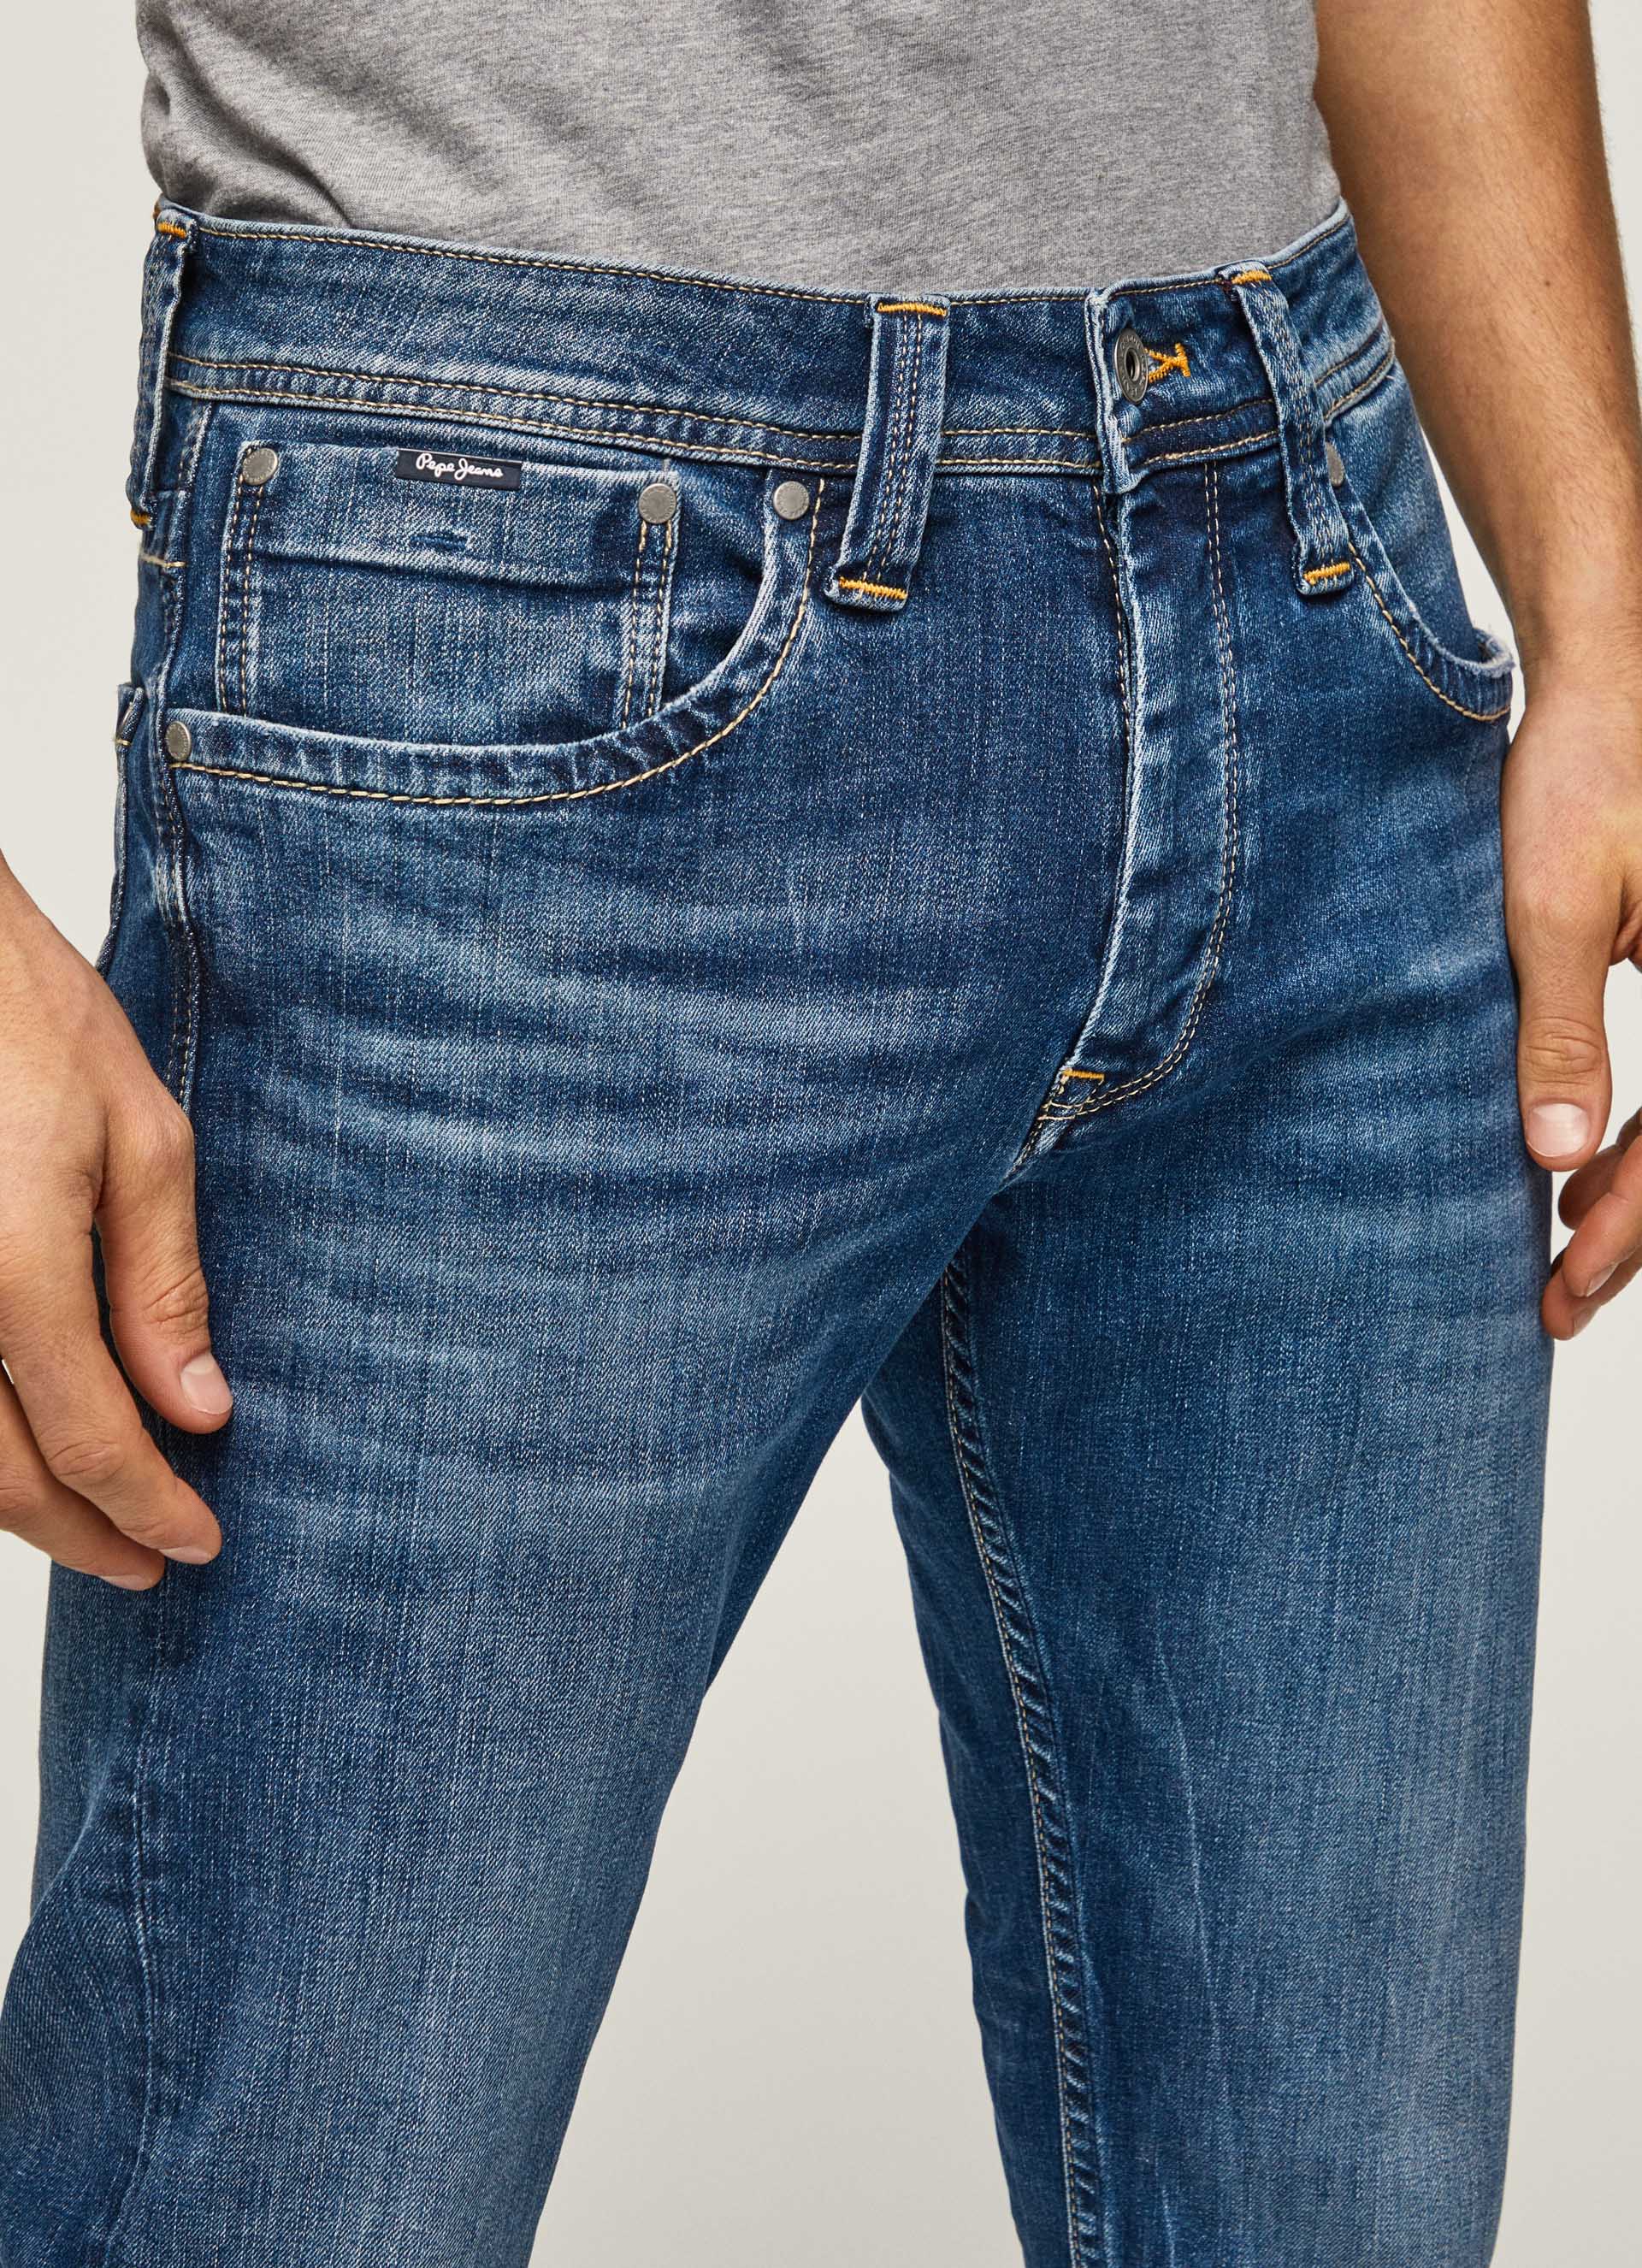 peppermint wipe out paddle CASH REGULAR MID WAIST JEANS | PEPEJEANS